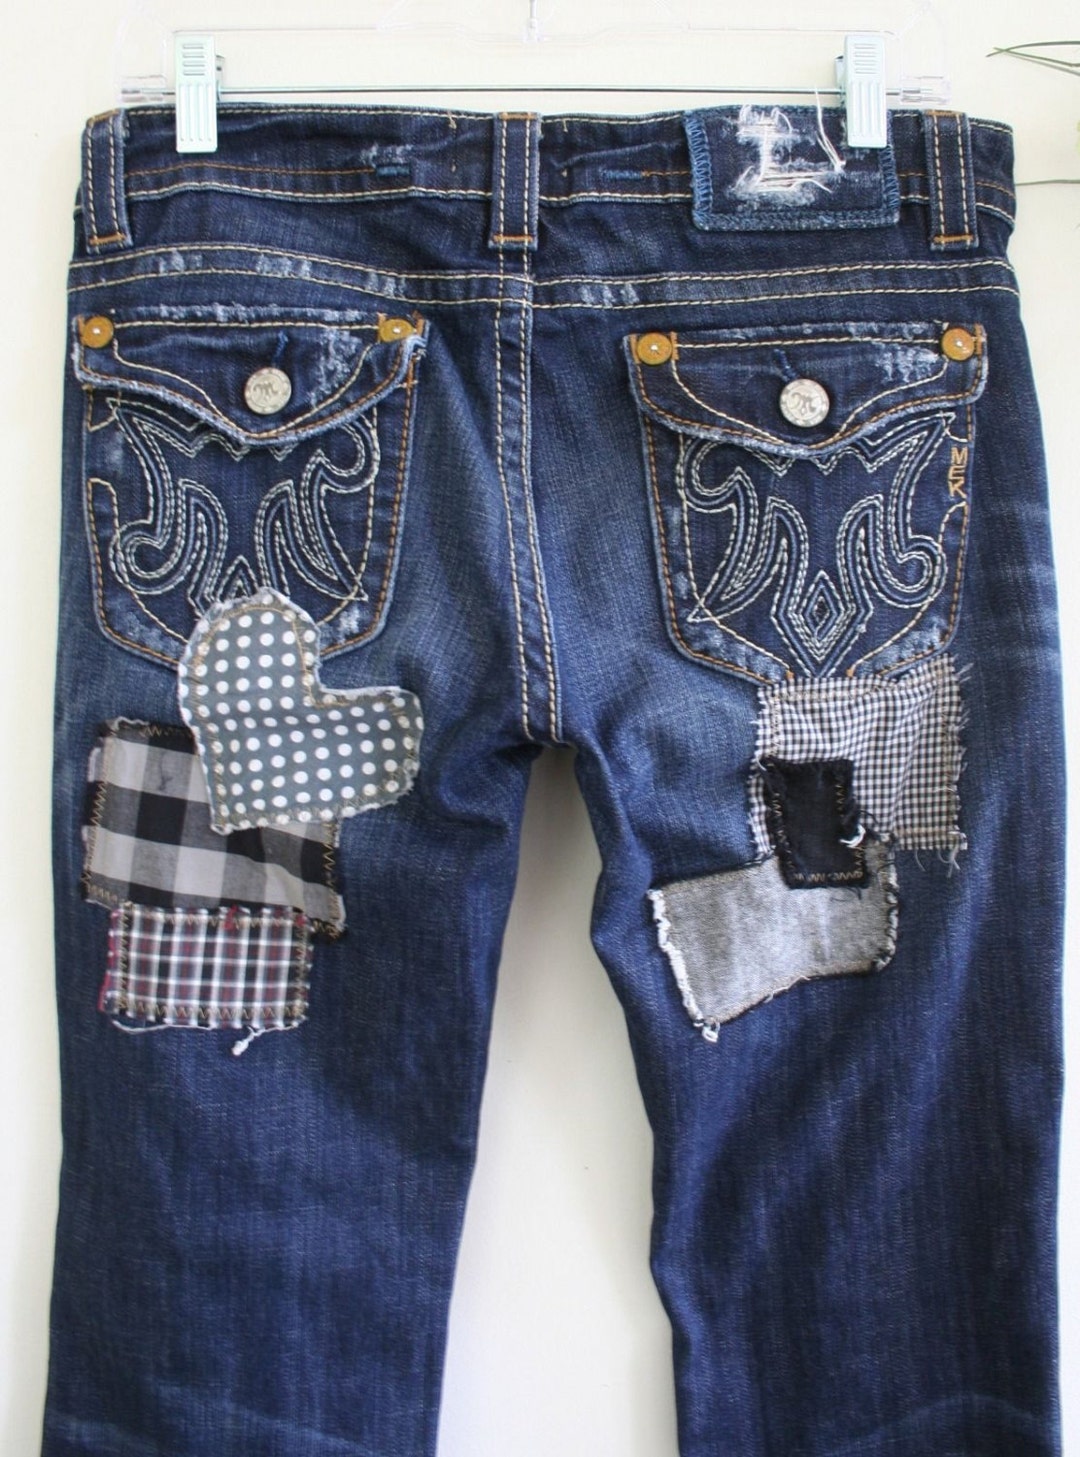 Recycled Jeans / Custom Handmade Jeans / by Breathe-again - Etsy